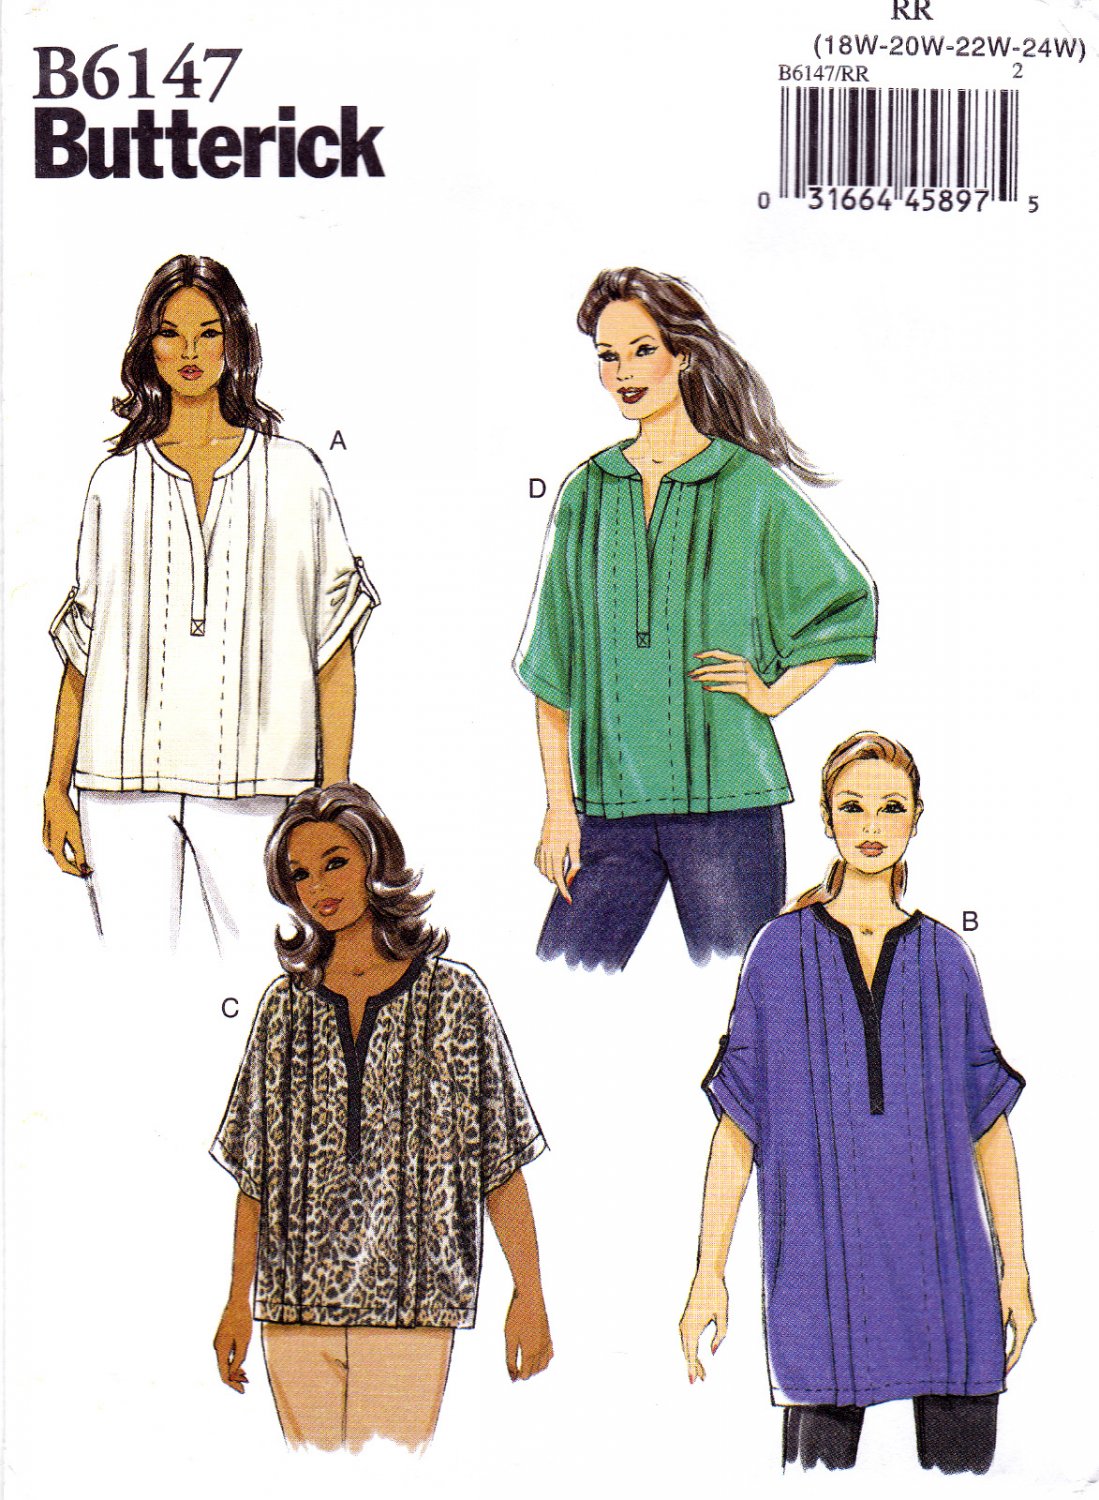 Butterick B6147 6147 Womens Top and Tunic Pullover Sewing Pattern Sizes 18W-20W-22W-24W